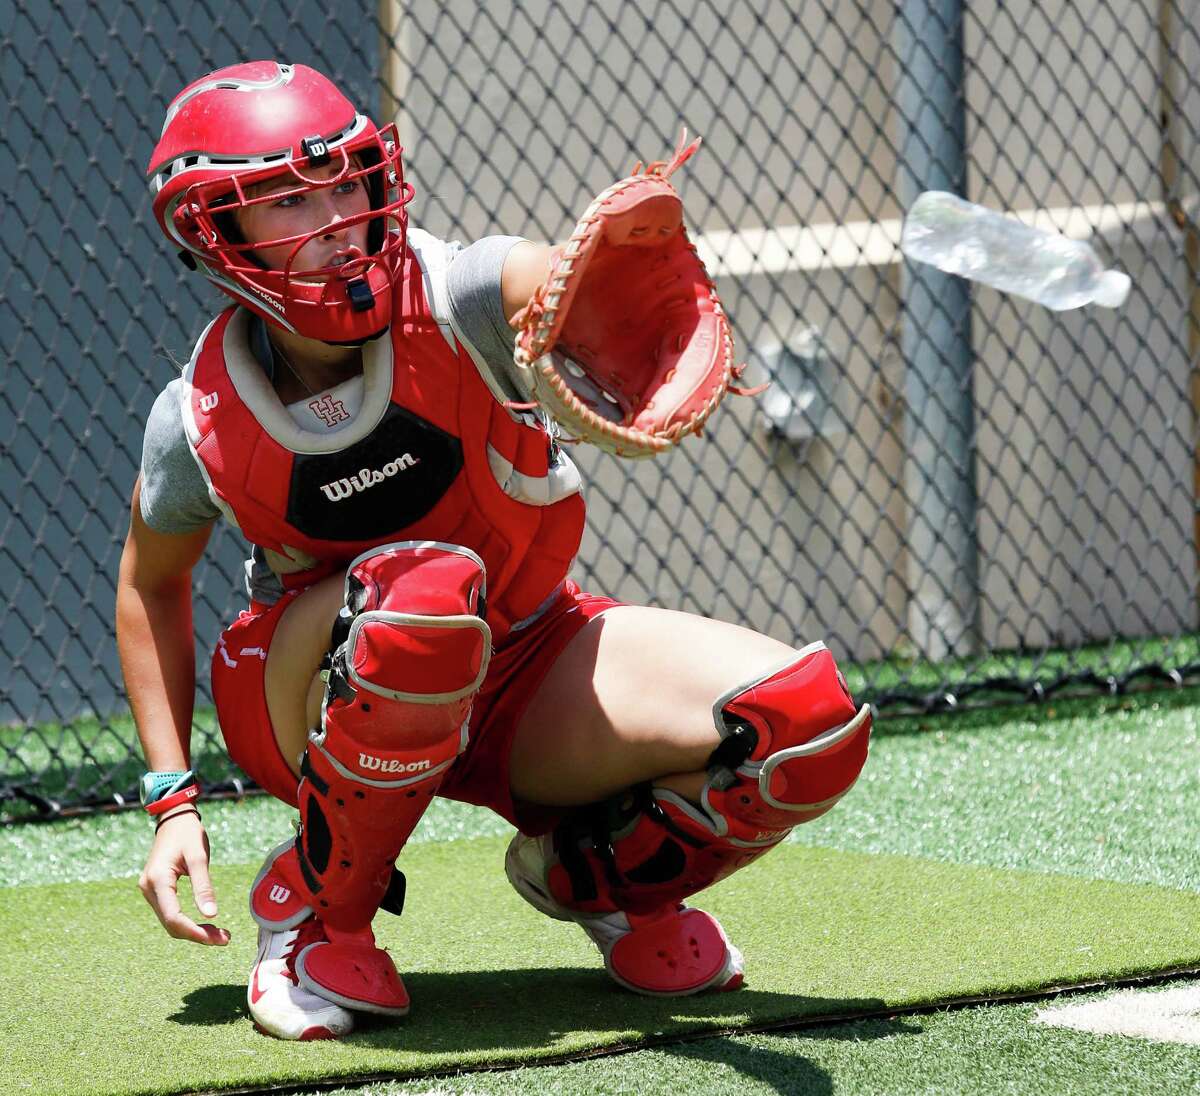 UH catcher Haley Outon hit .308 and led the American Athletic Conference in home runs (15) and RBIs (53) this season.